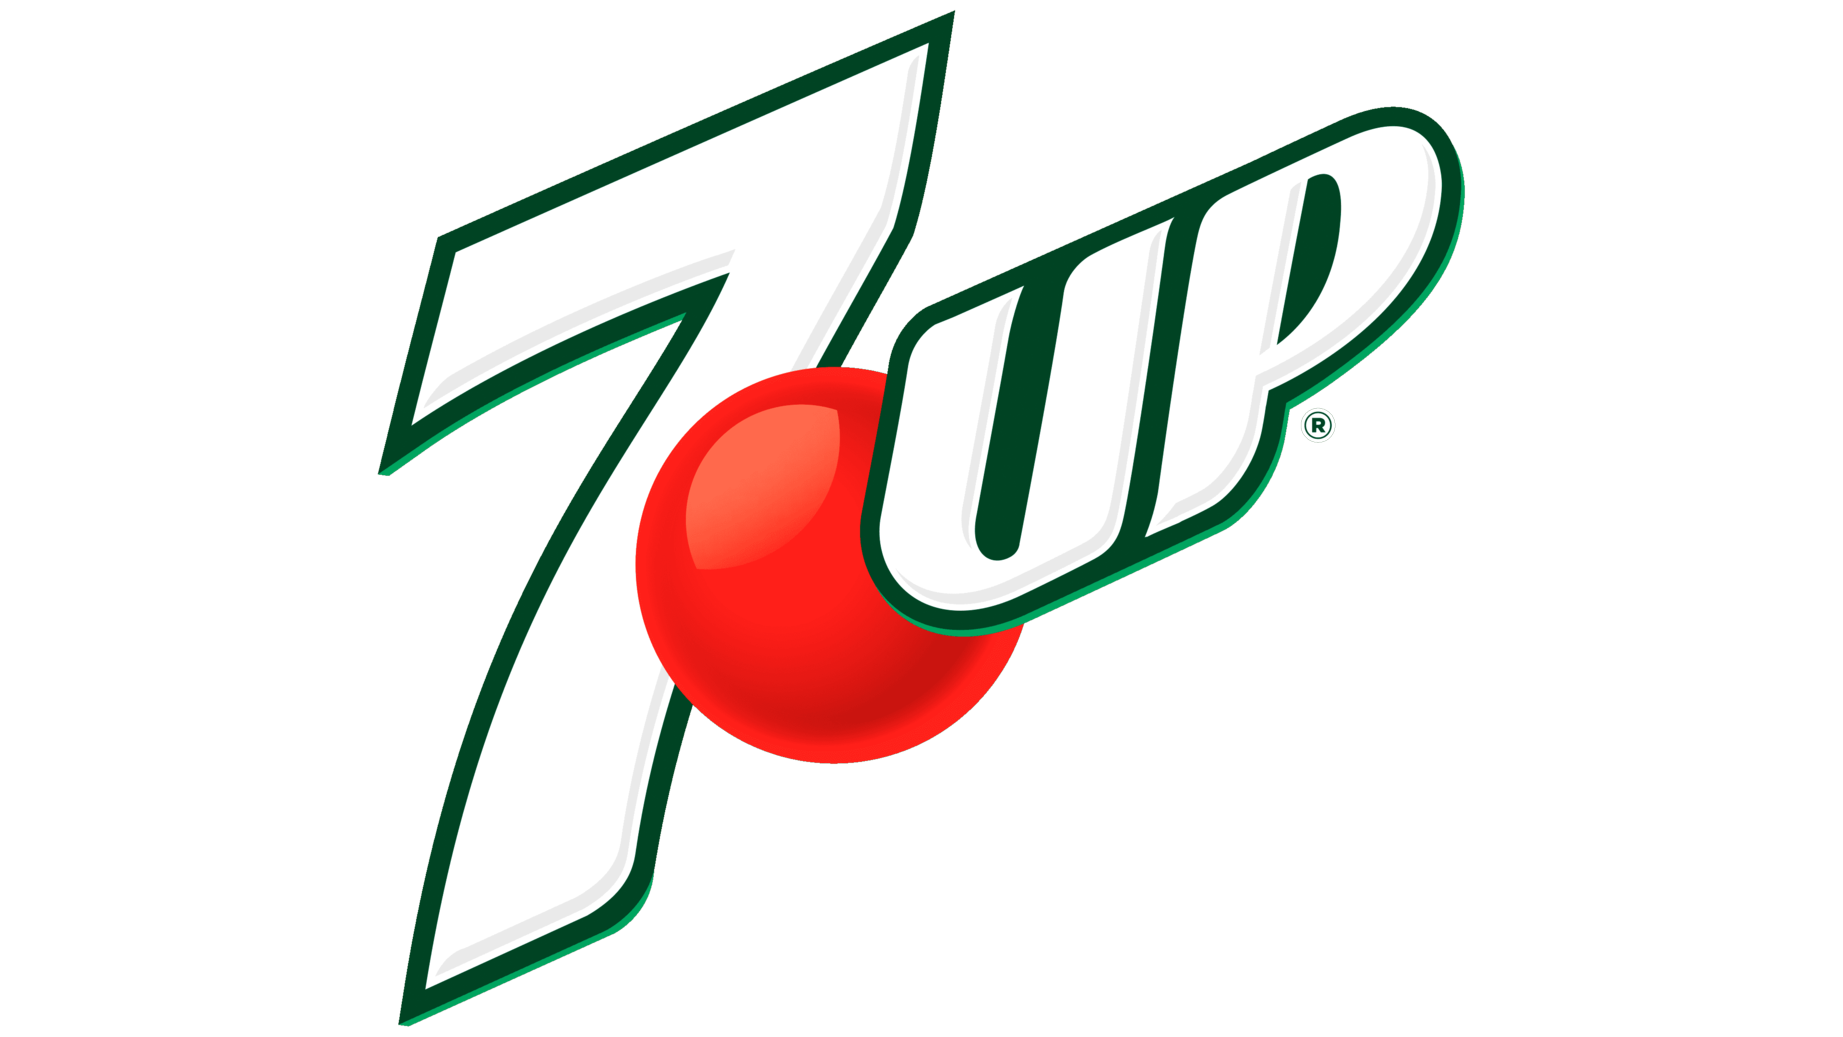 7 up sign